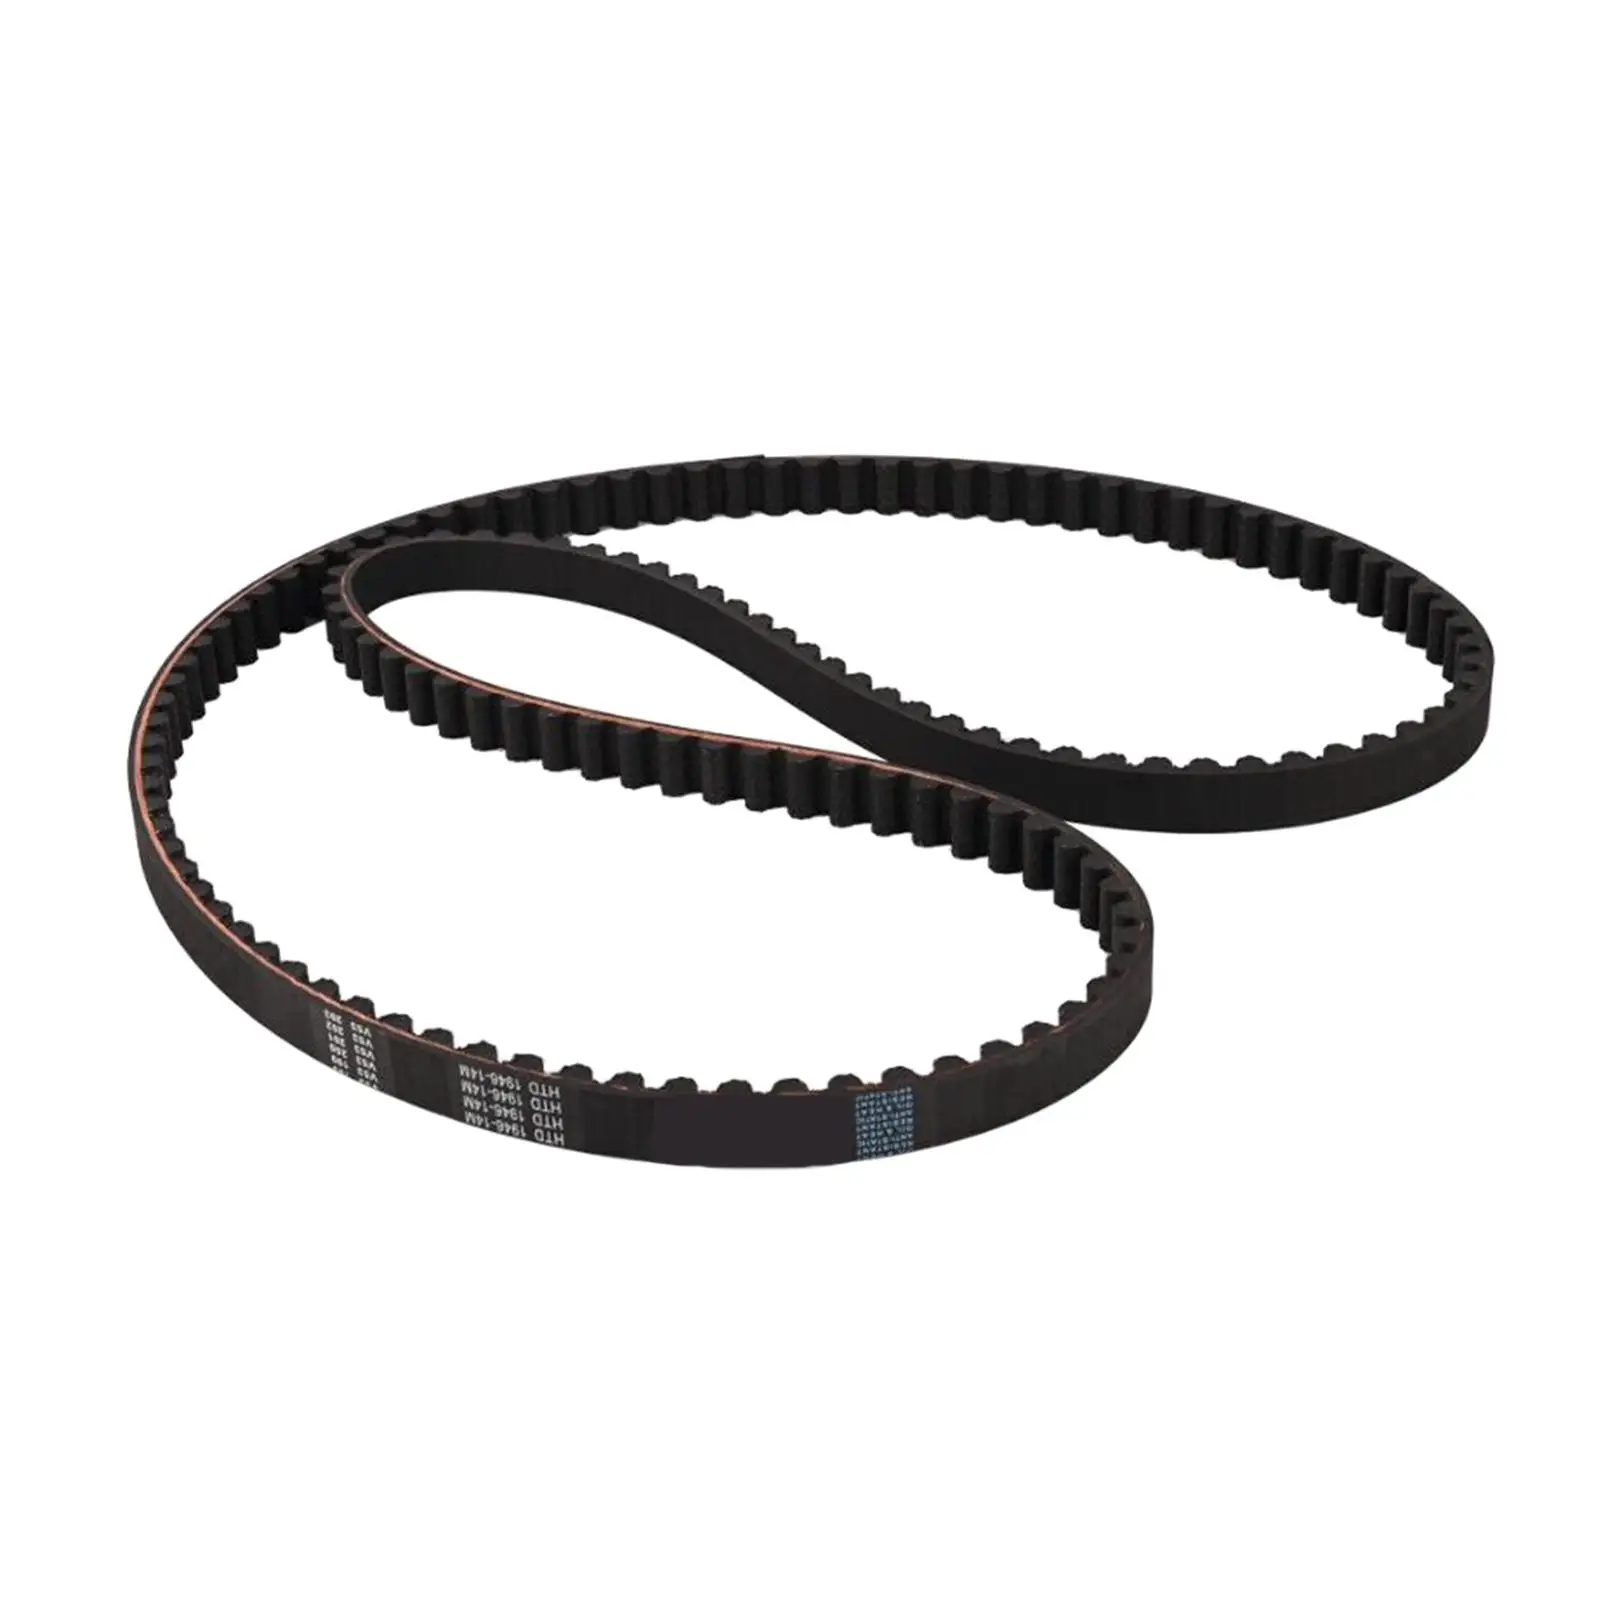 Rear Drive Belt Easy Installation Replacement 133 Tooth Assembly Professional 1204-0053 for Harley Softail FX fl 2007-2011